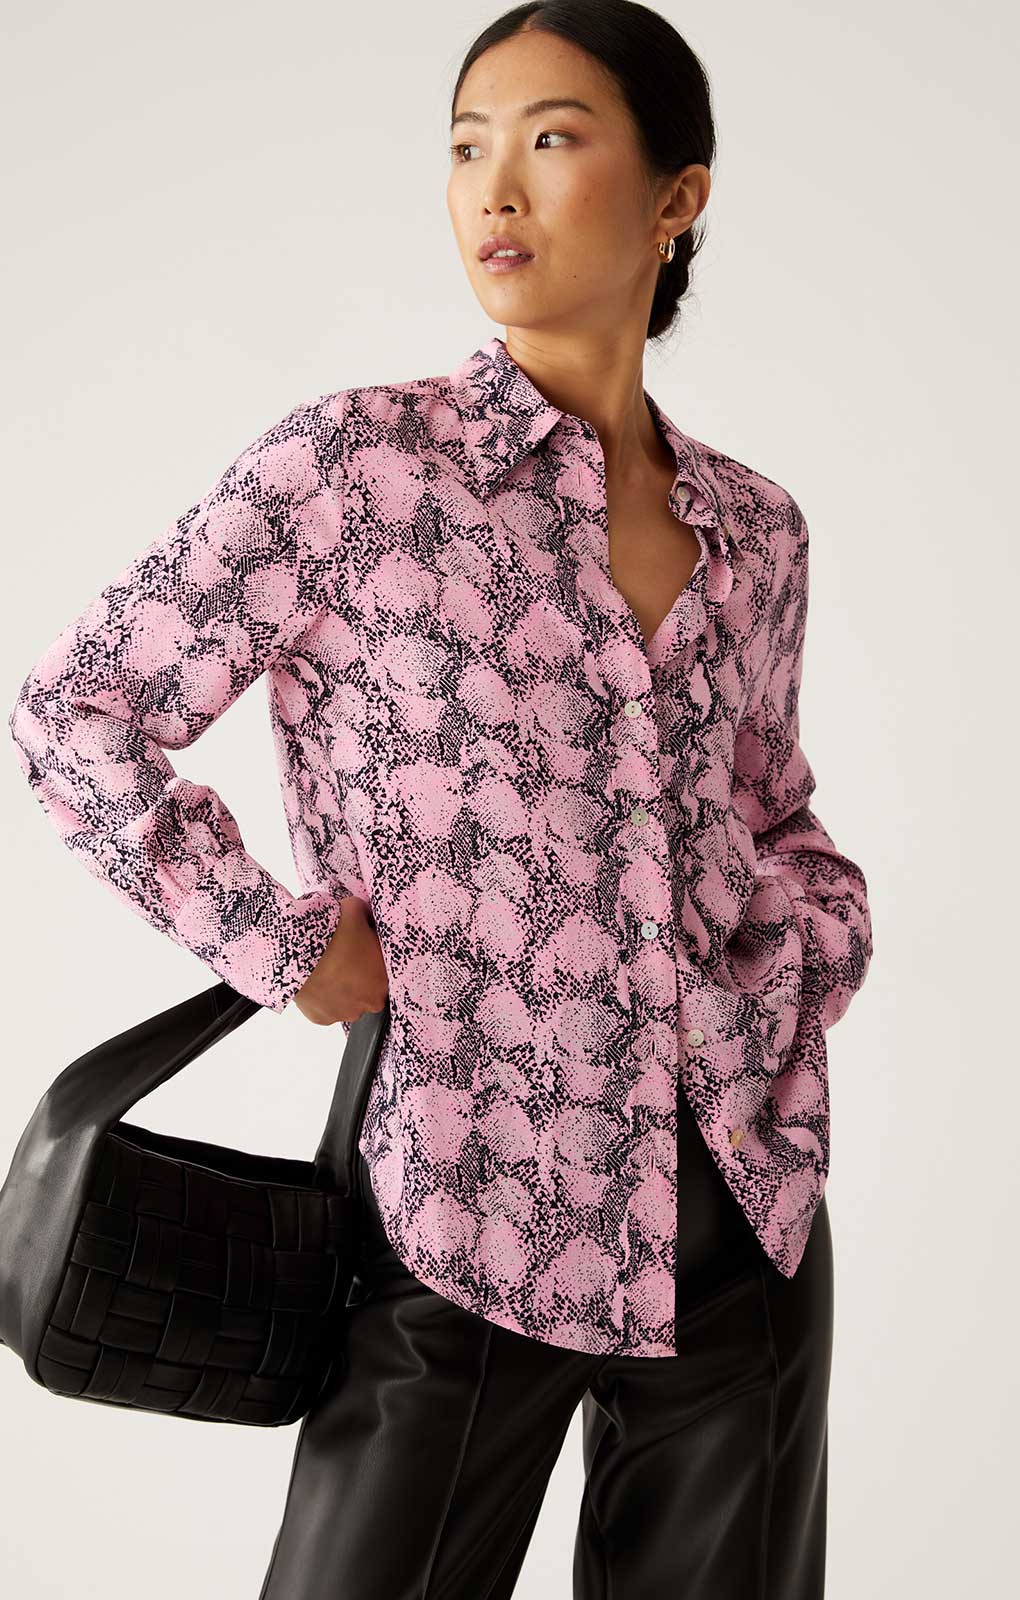 M&S Pink Snake Print Collared Long Sleeve Shirt product image